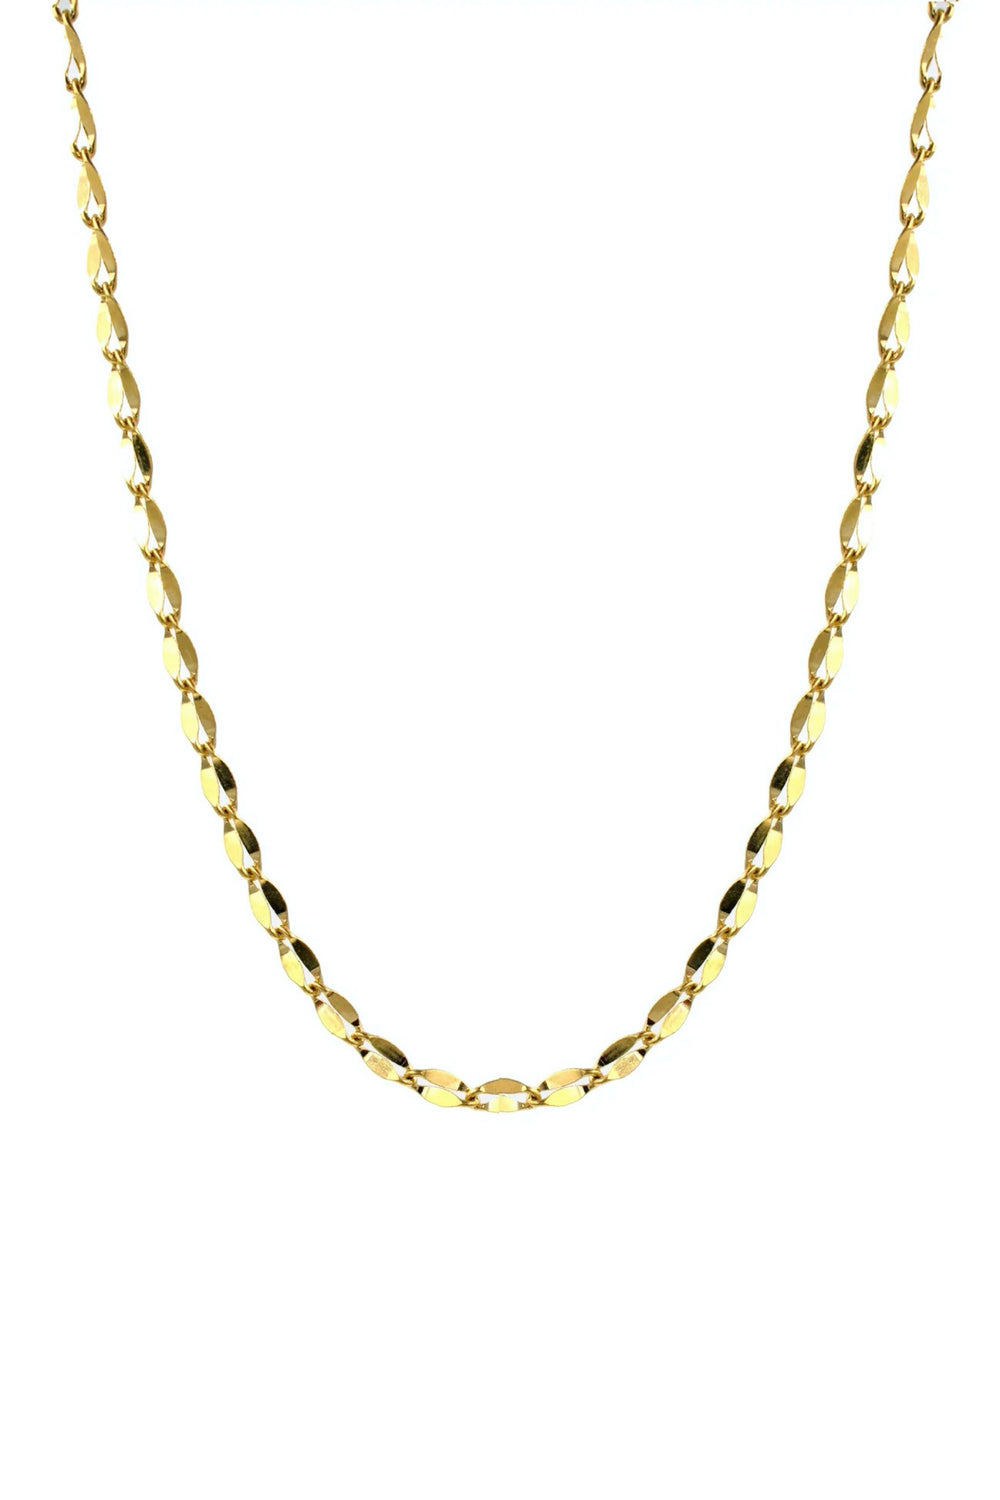 Gold Tiffany Chain Necklace